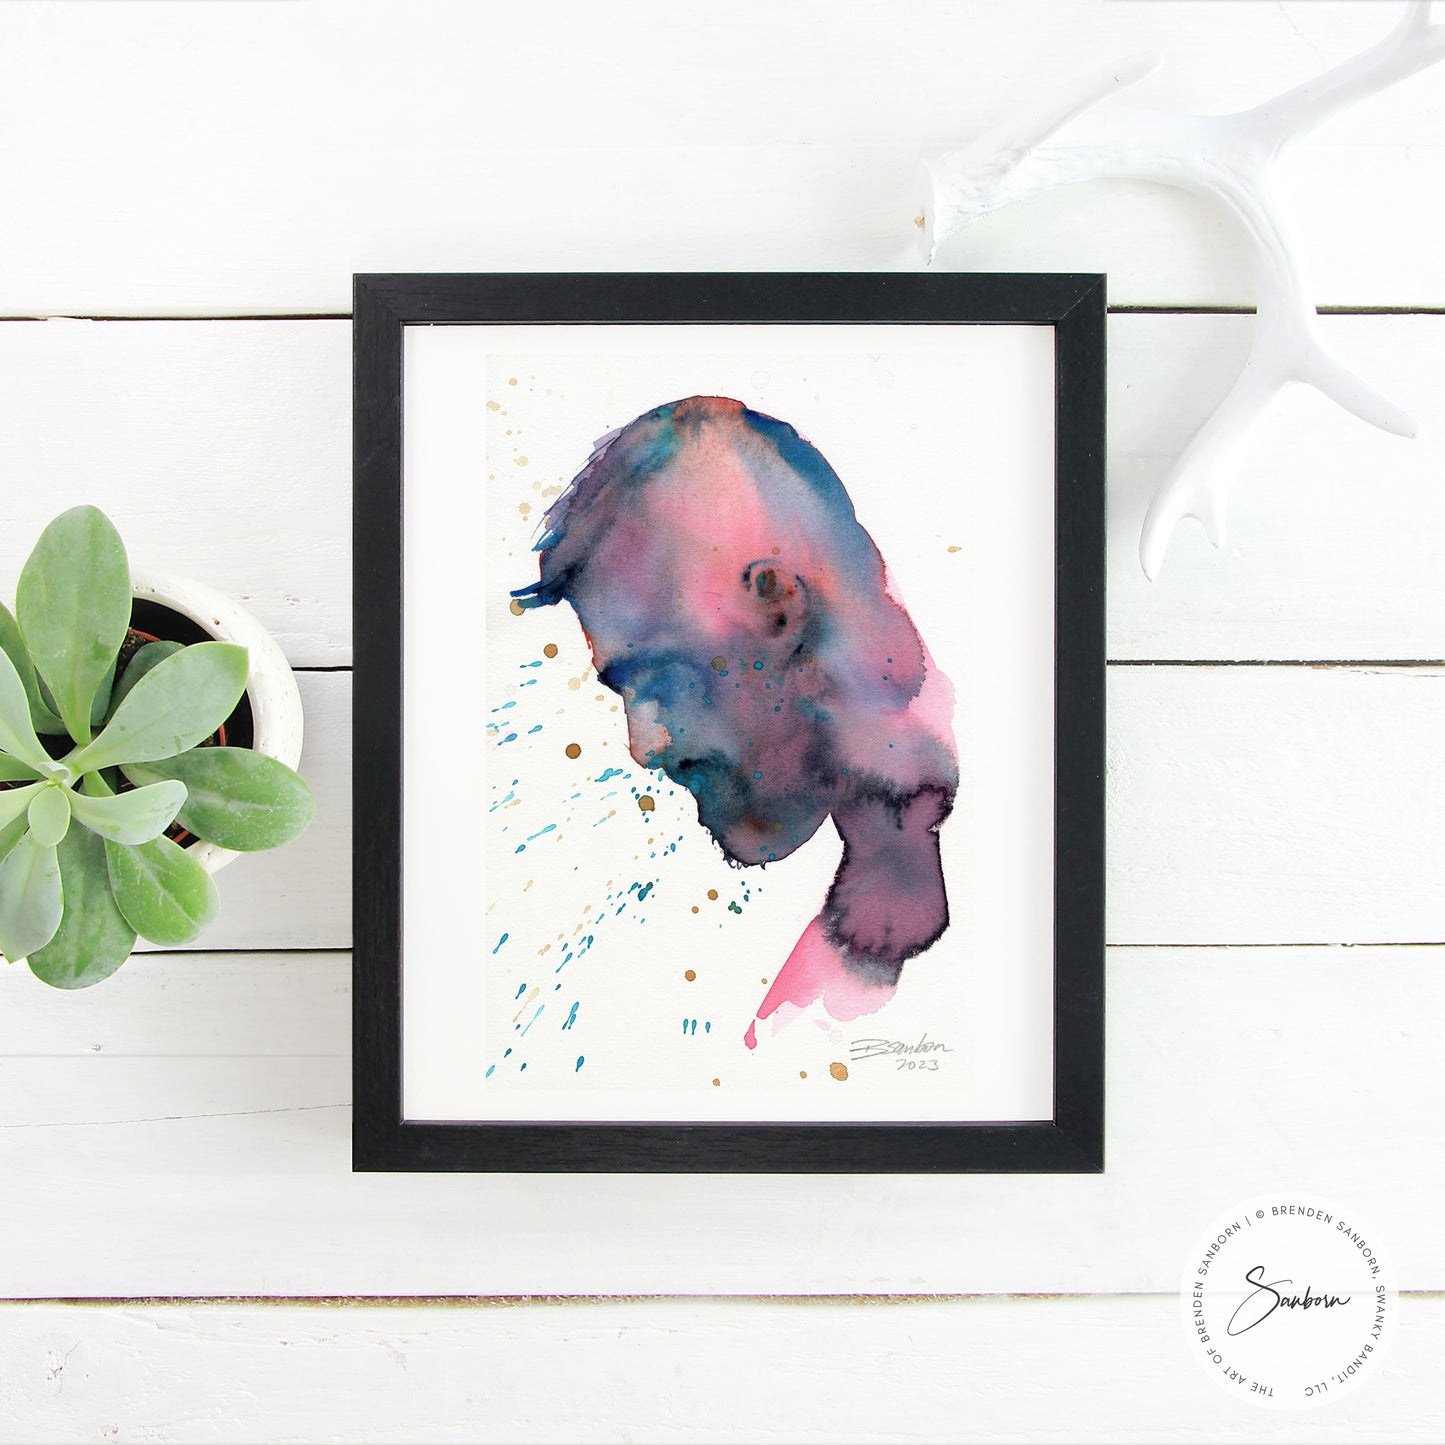 Profile of Bearded Man with Distinct Facial Features - 6x9" Original Watercolor Painting